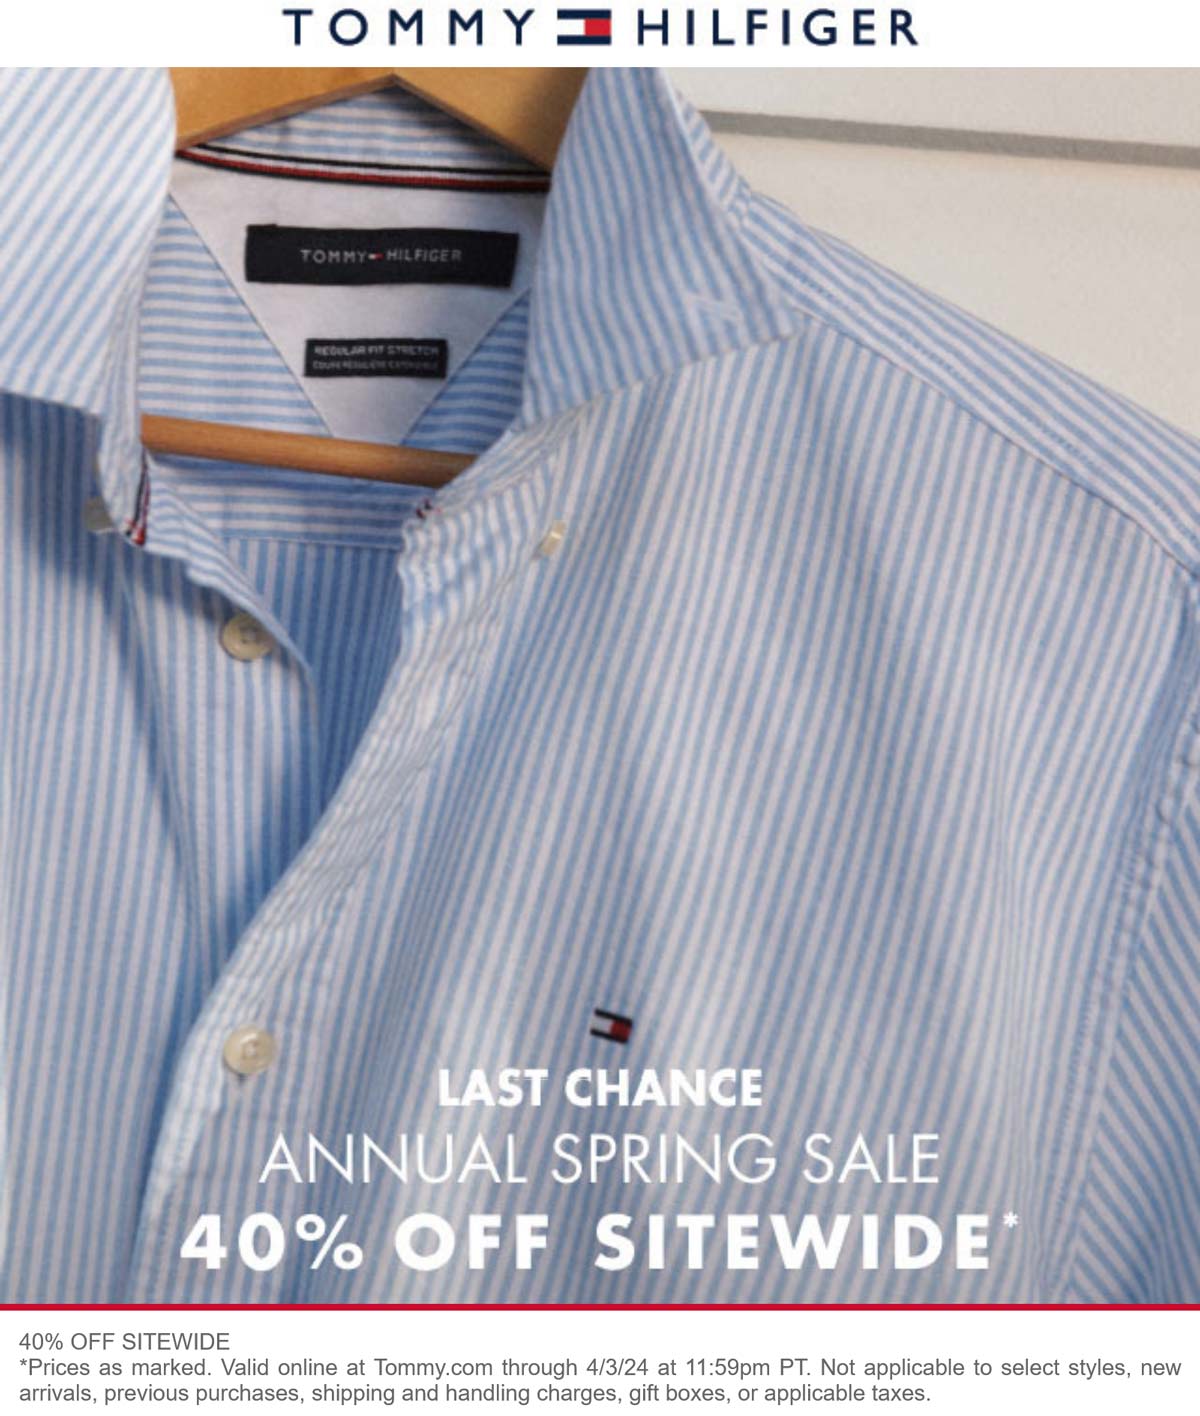 Tommy Hilfiger stores Coupon  40% off everything online today at Tommy Hilfiger #tommyhilfiger 